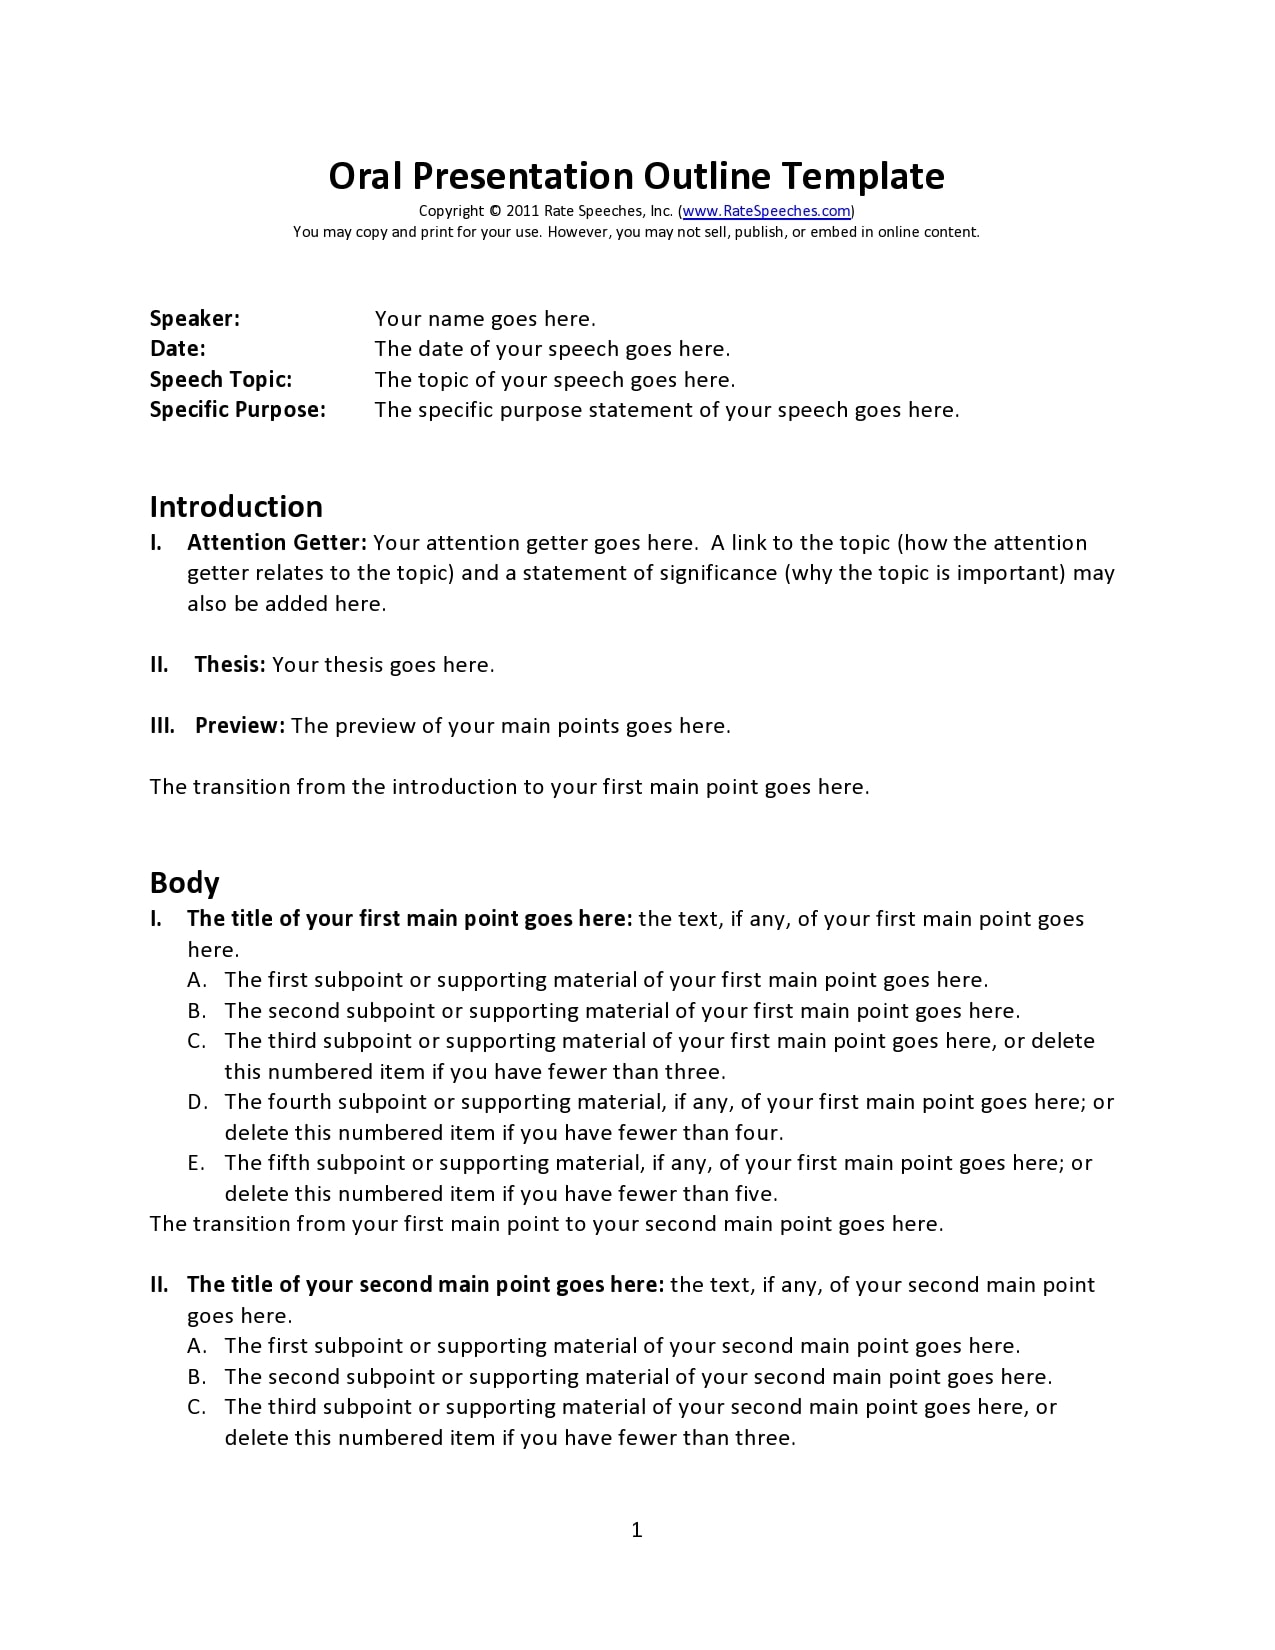 rough draft outline template